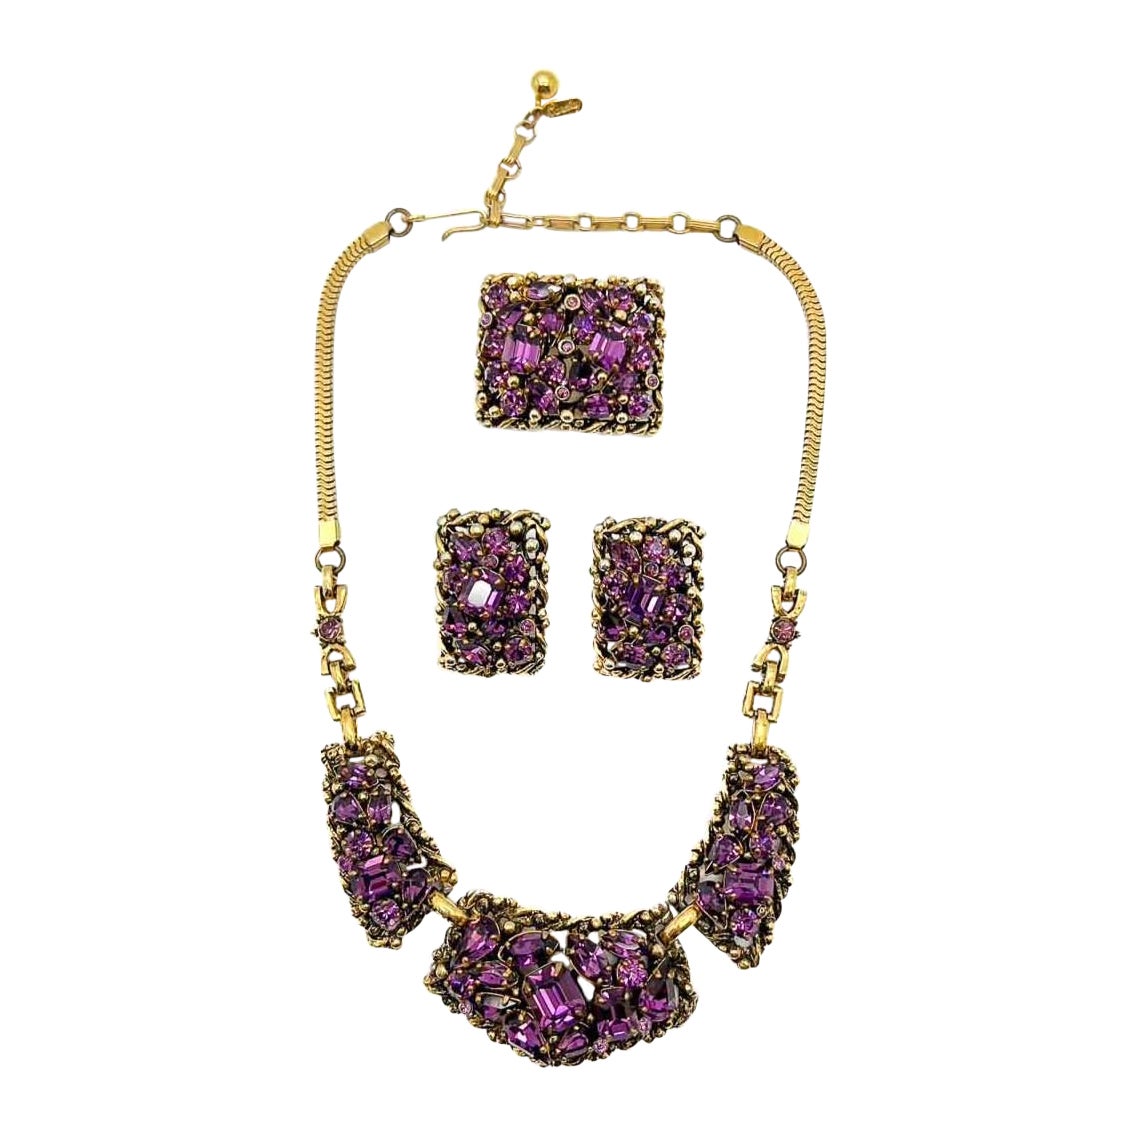 Barclay's Jewels of India" Amethyst-Kristall-Parüre 1950er Jahre im Angebot